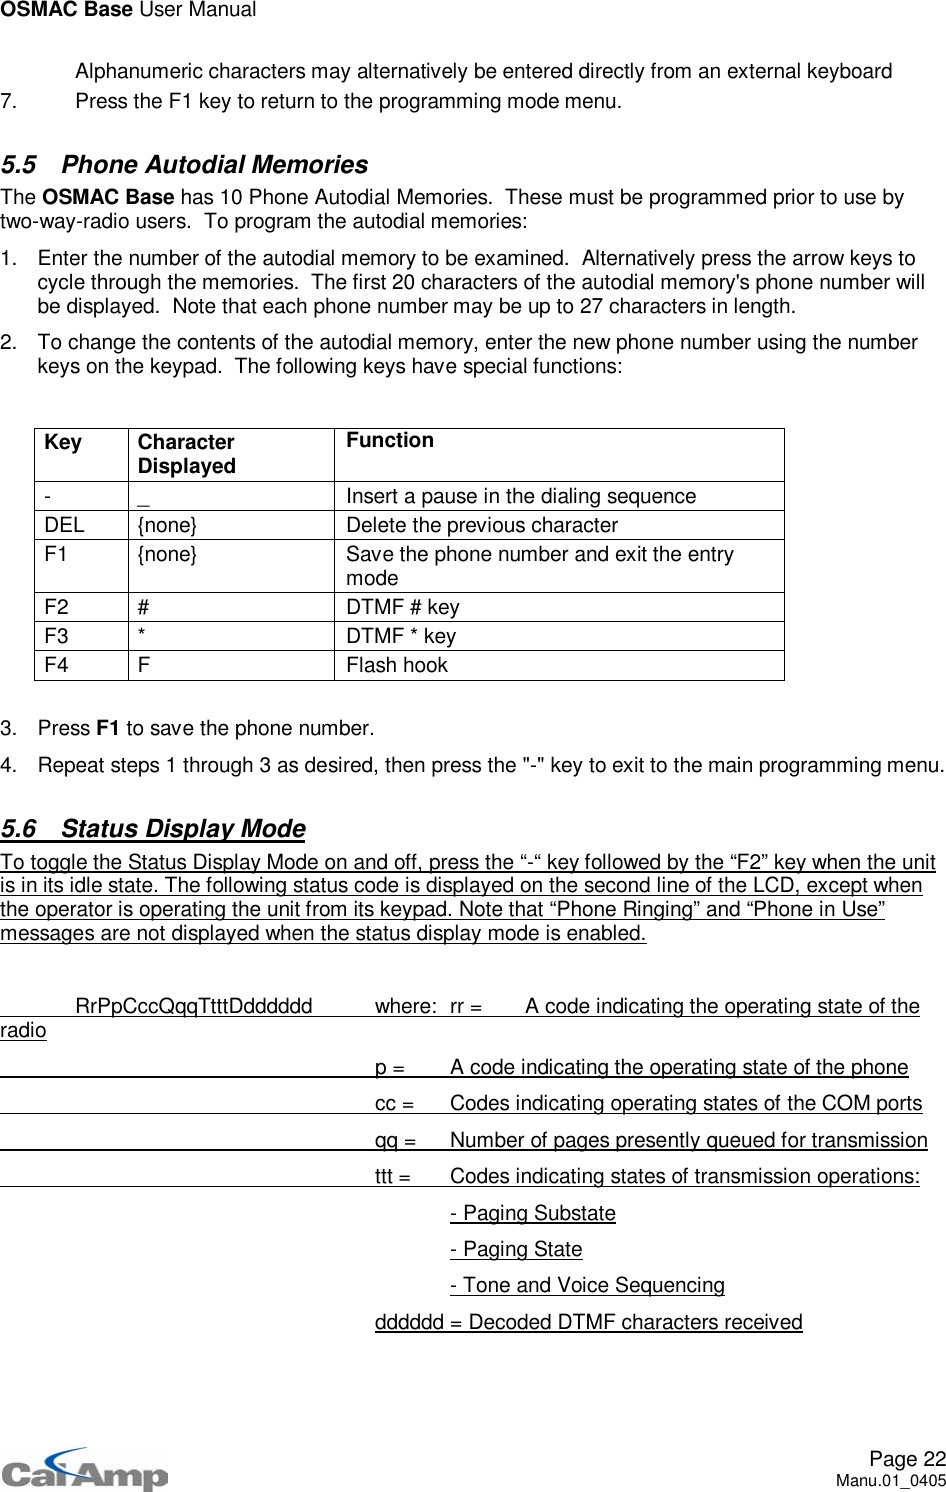 OSMAC Base User ManualPage 22Manu.01_0405 Alphanumeric characters may alternatively be entered directly from an external keyboard7. Press the F1 key to return to the programming mode menu.5.5 Phone Autodial MemoriesThe OSMAC Base has 10 Phone Autodial Memories. These must be programmed prior to use bytwo-way-radio users. To program the autodial memories:1. Enter the number of the autodial memory to be examined. Alternatively press the arrow keys tocycle through the memories. The first 20 characters of the autodial memory&apos;s phone number willbe displayed. Note that each phone number may be up to 27 characters in length.2. To change the contents of the autodial memory, enter the new phone number using the numberkeys on the keypad. The following keys have special functions:Key CharacterDisplayed Function- _ Insert a pause in the dialing sequenceDEL {none} Delete the previous characterF1 {none} Save the phone number and exit the entrymodeF2 # DTMF # keyF3 * DTMF * keyF4 F Flash hook3. Press F1 to save the phone number.4. Repeat steps 1 through 3 as desired, then press the &quot;-&quot; key to exit to the main programming menu.5.6 Status Display ModeTo toggle the Status Display Mode on and off, press the “-“ key followed by the “F2” key when the unitis in its idle state. The following status code is displayed on the second line of the LCD, except whenthe operator is operating the unit from its keypad. Note that “Phone Ringing” and “Phone in Use”messages are not displayed when the status display mode is enabled.RrPpCccQqqTtttDdddddd where: rr = A code indicating the operating state of theradiop = A code indicating the operating state of the phonecc = Codes indicating operating states of the COM portsqq = Number of pages presently queued for transmissionttt = Codes indicating states of transmission operations:- Paging Substate- Paging State- Tone and Voice Sequencingdddddd = Decoded DTMF characters received